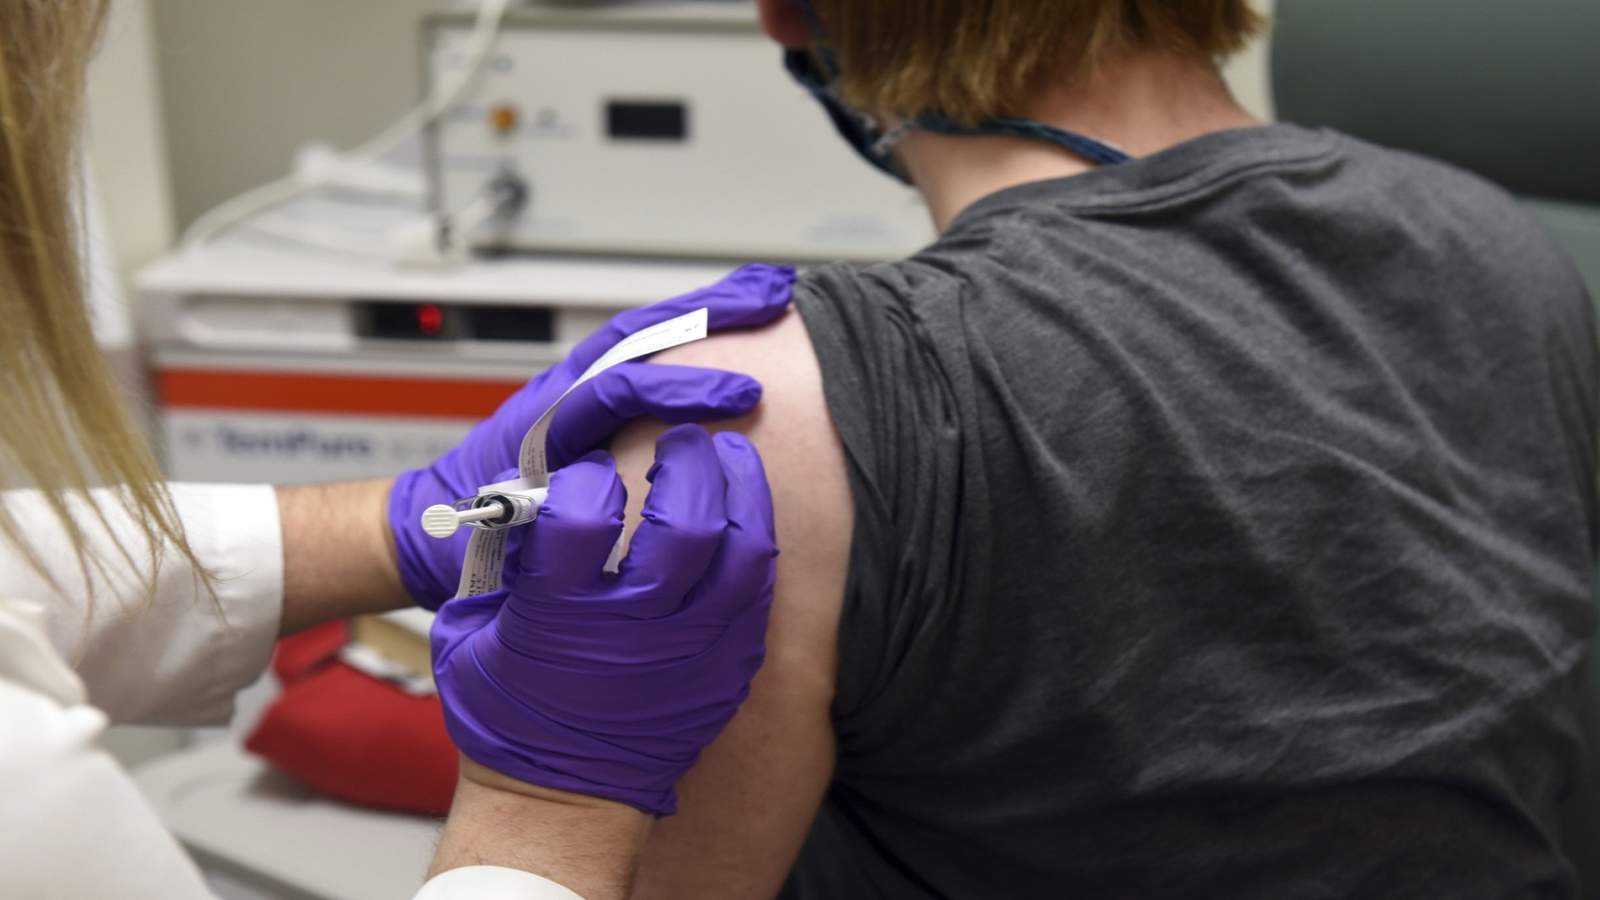 Gov. Abbott says Texas is ready to distribute COVID-19 vaccine, but when will it be available?